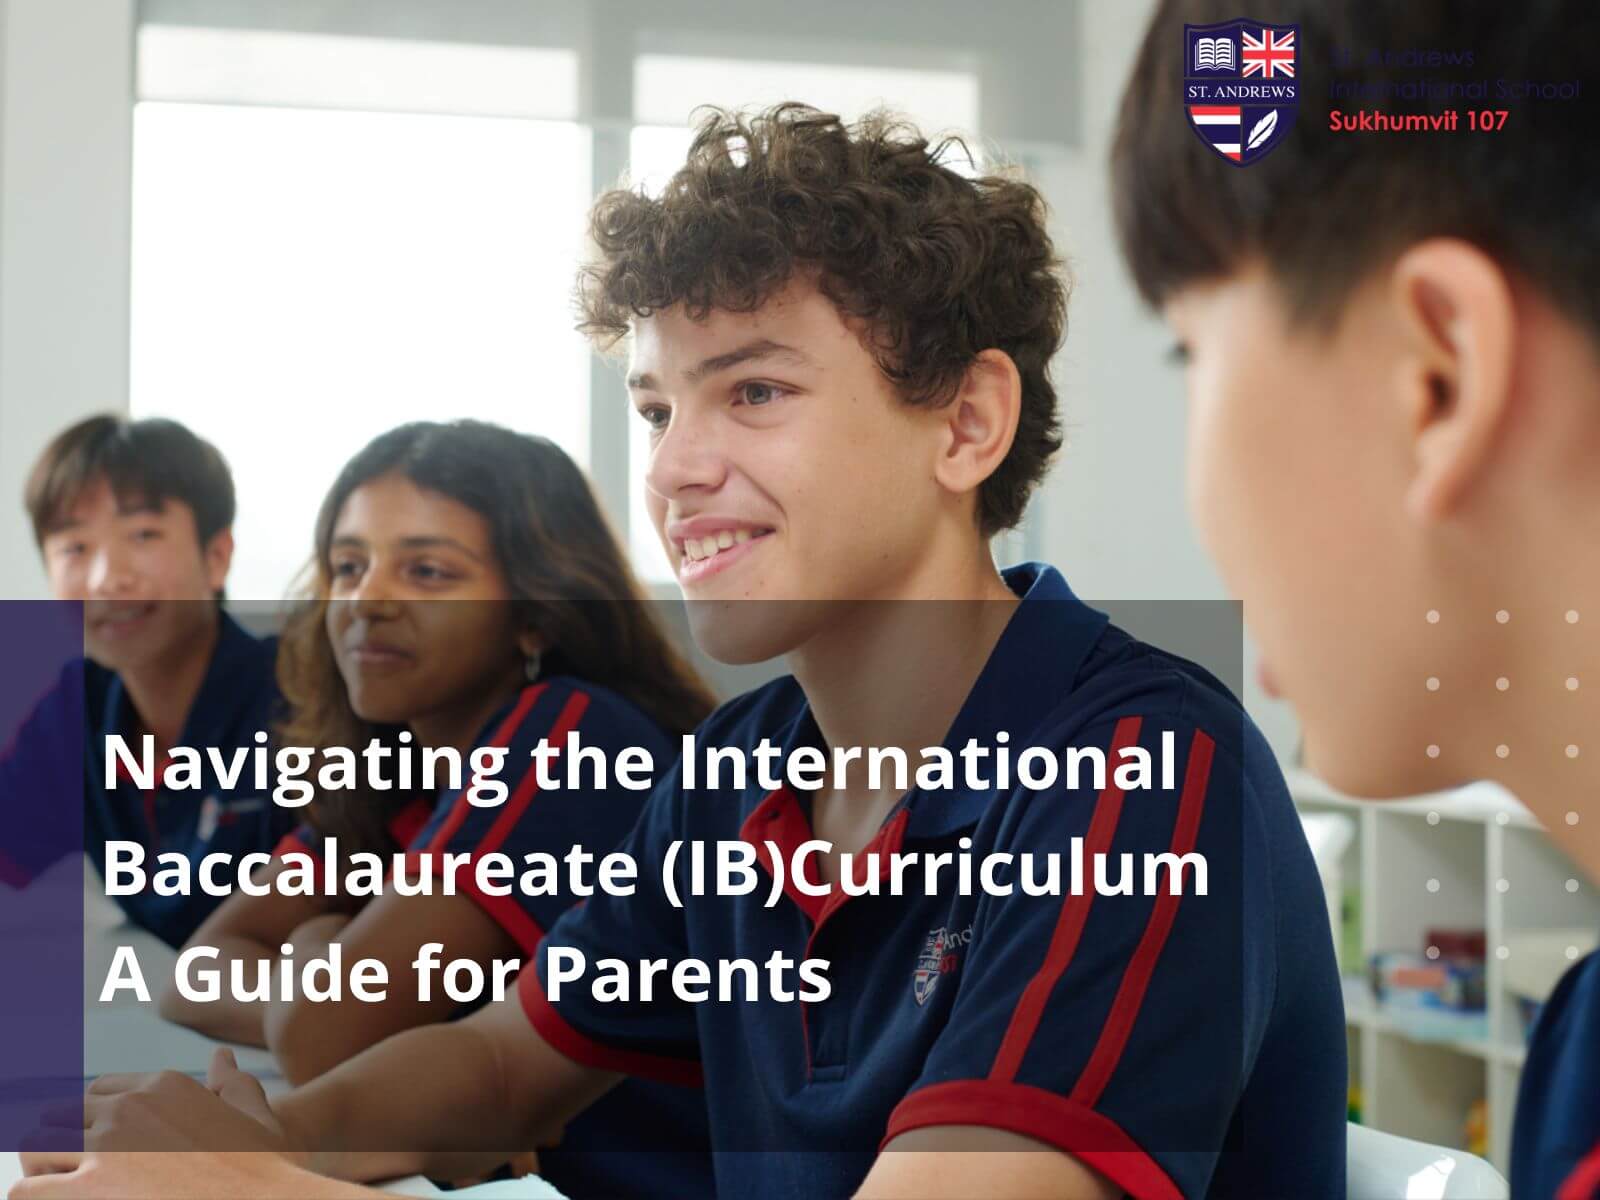 Navigating the International Baccalaureate (IB) Curriculum A Guide for Parents